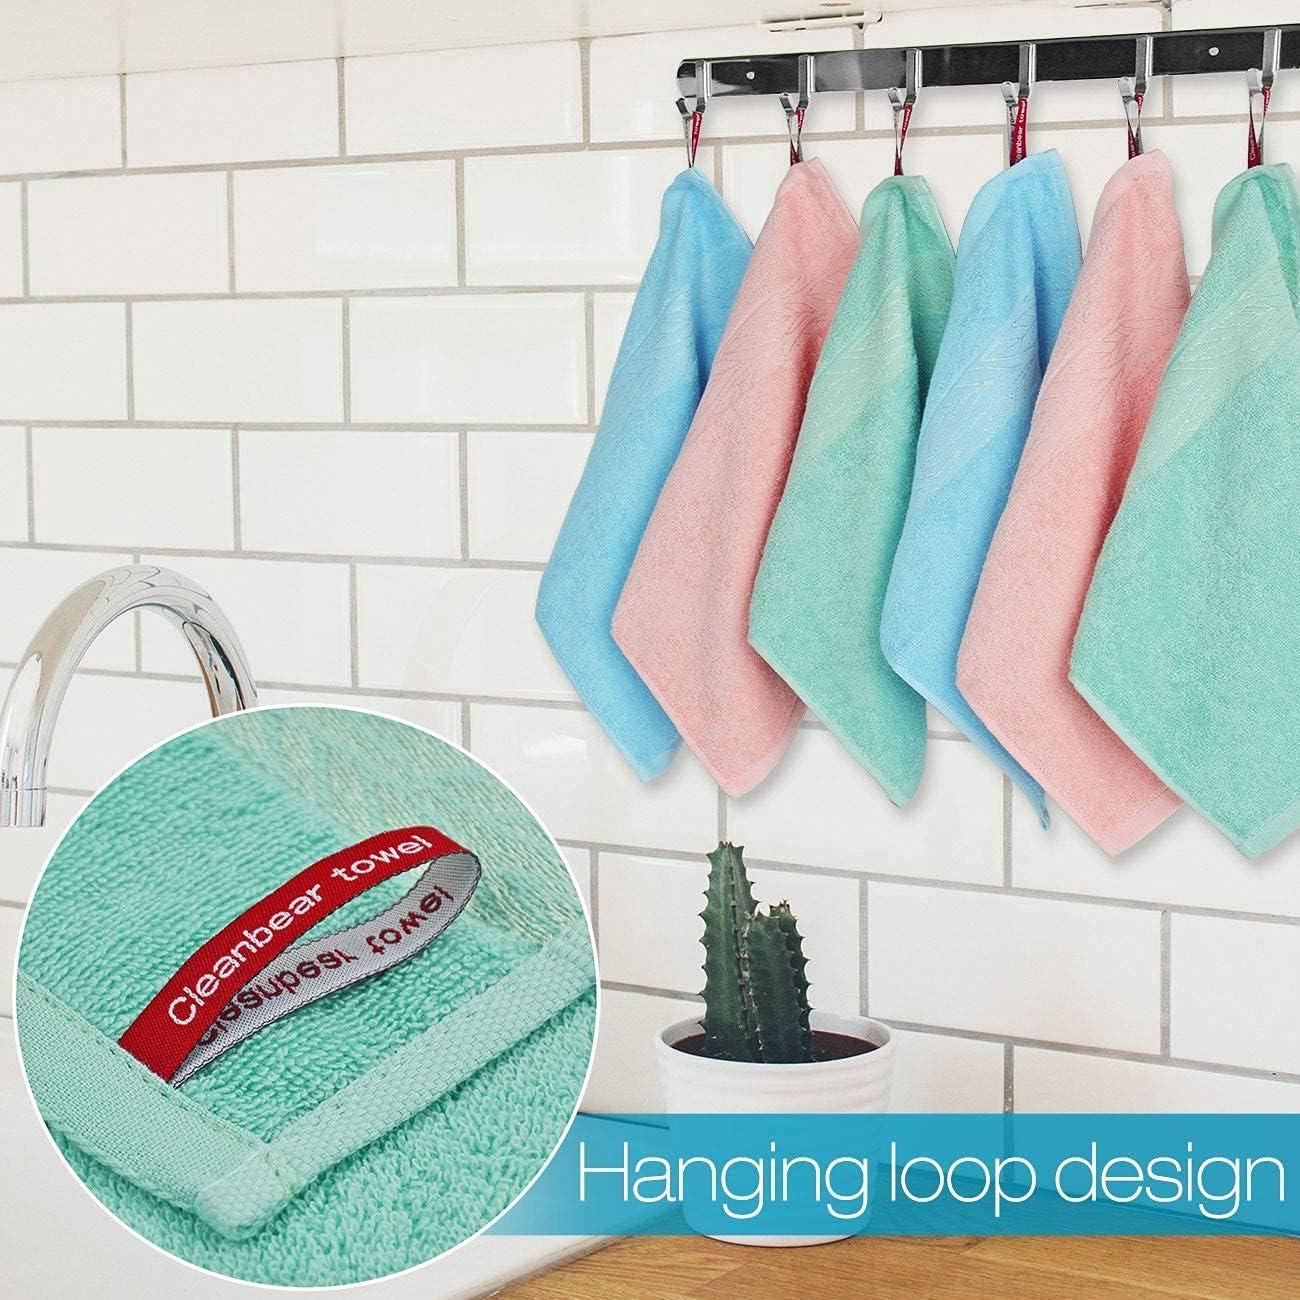 Cleanbear Washcloth Face Towels 6 Pack Wash Cloths for Bathrooms 13 by 13  Inches Large Washcloths with Decorative Patterns 3 Colors for Your  Different Family Members Sakura Pink Baby Blue Seafoam Green